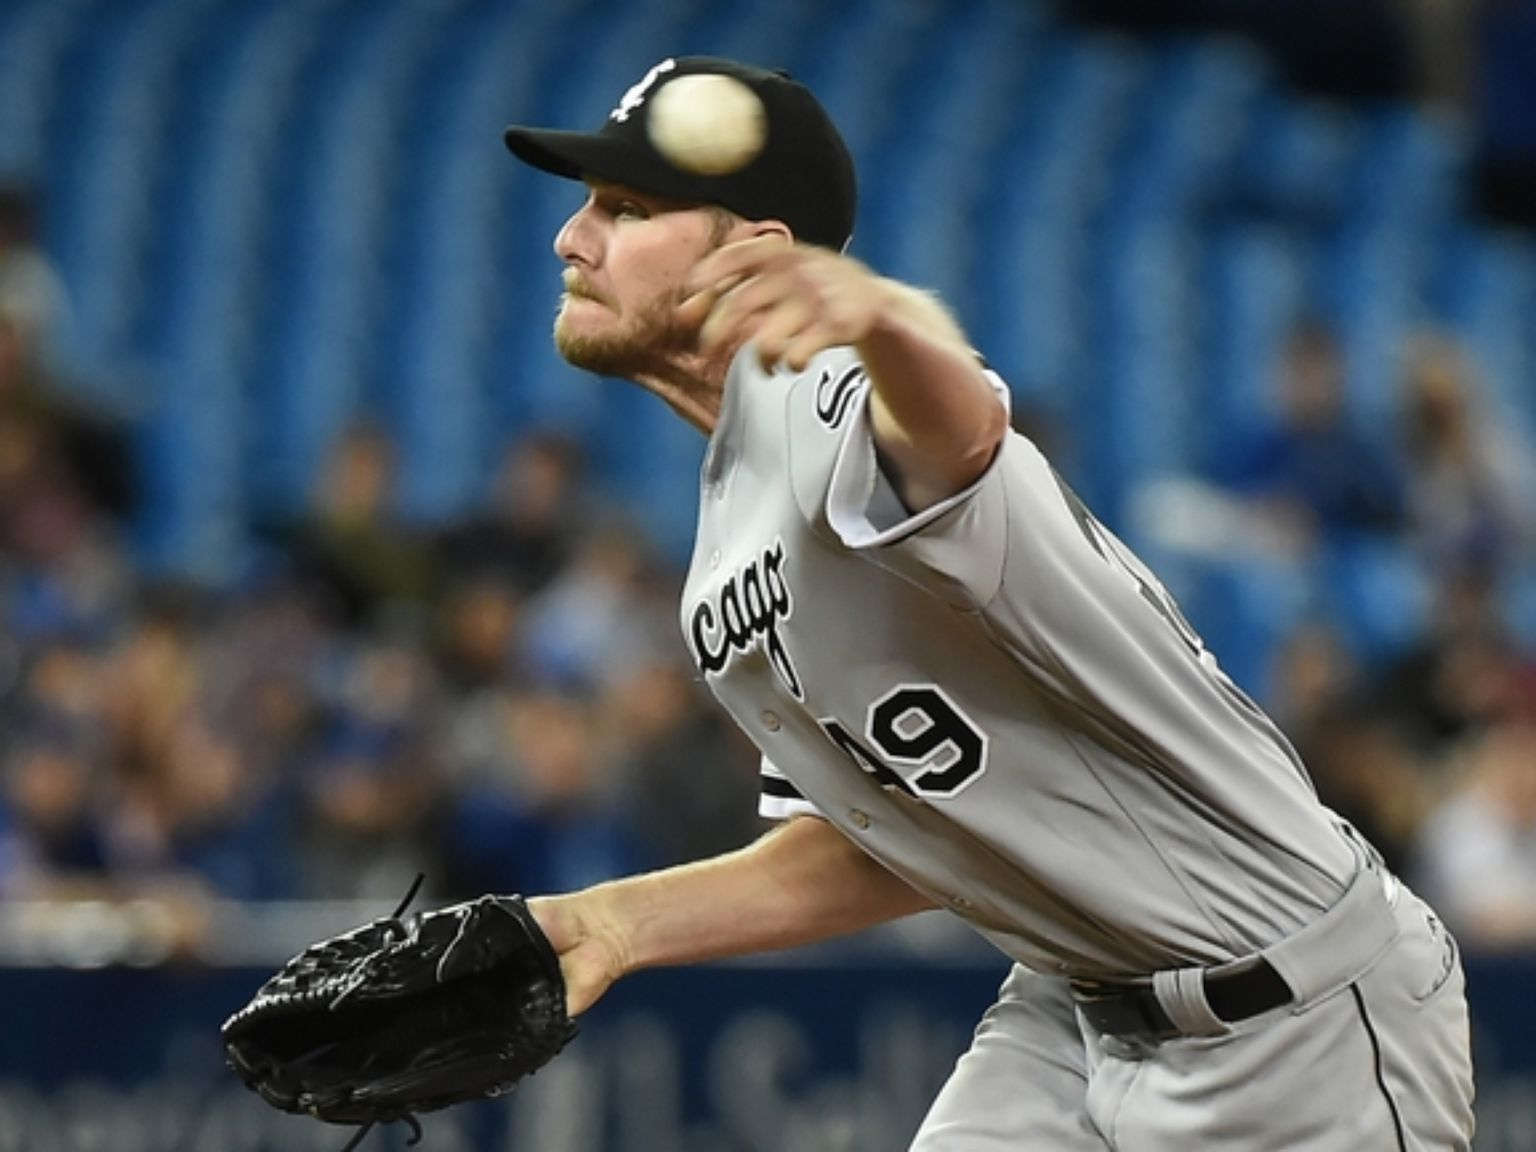 Sale up to 5-0, White Sox rout Blue Jays for 5th win in row